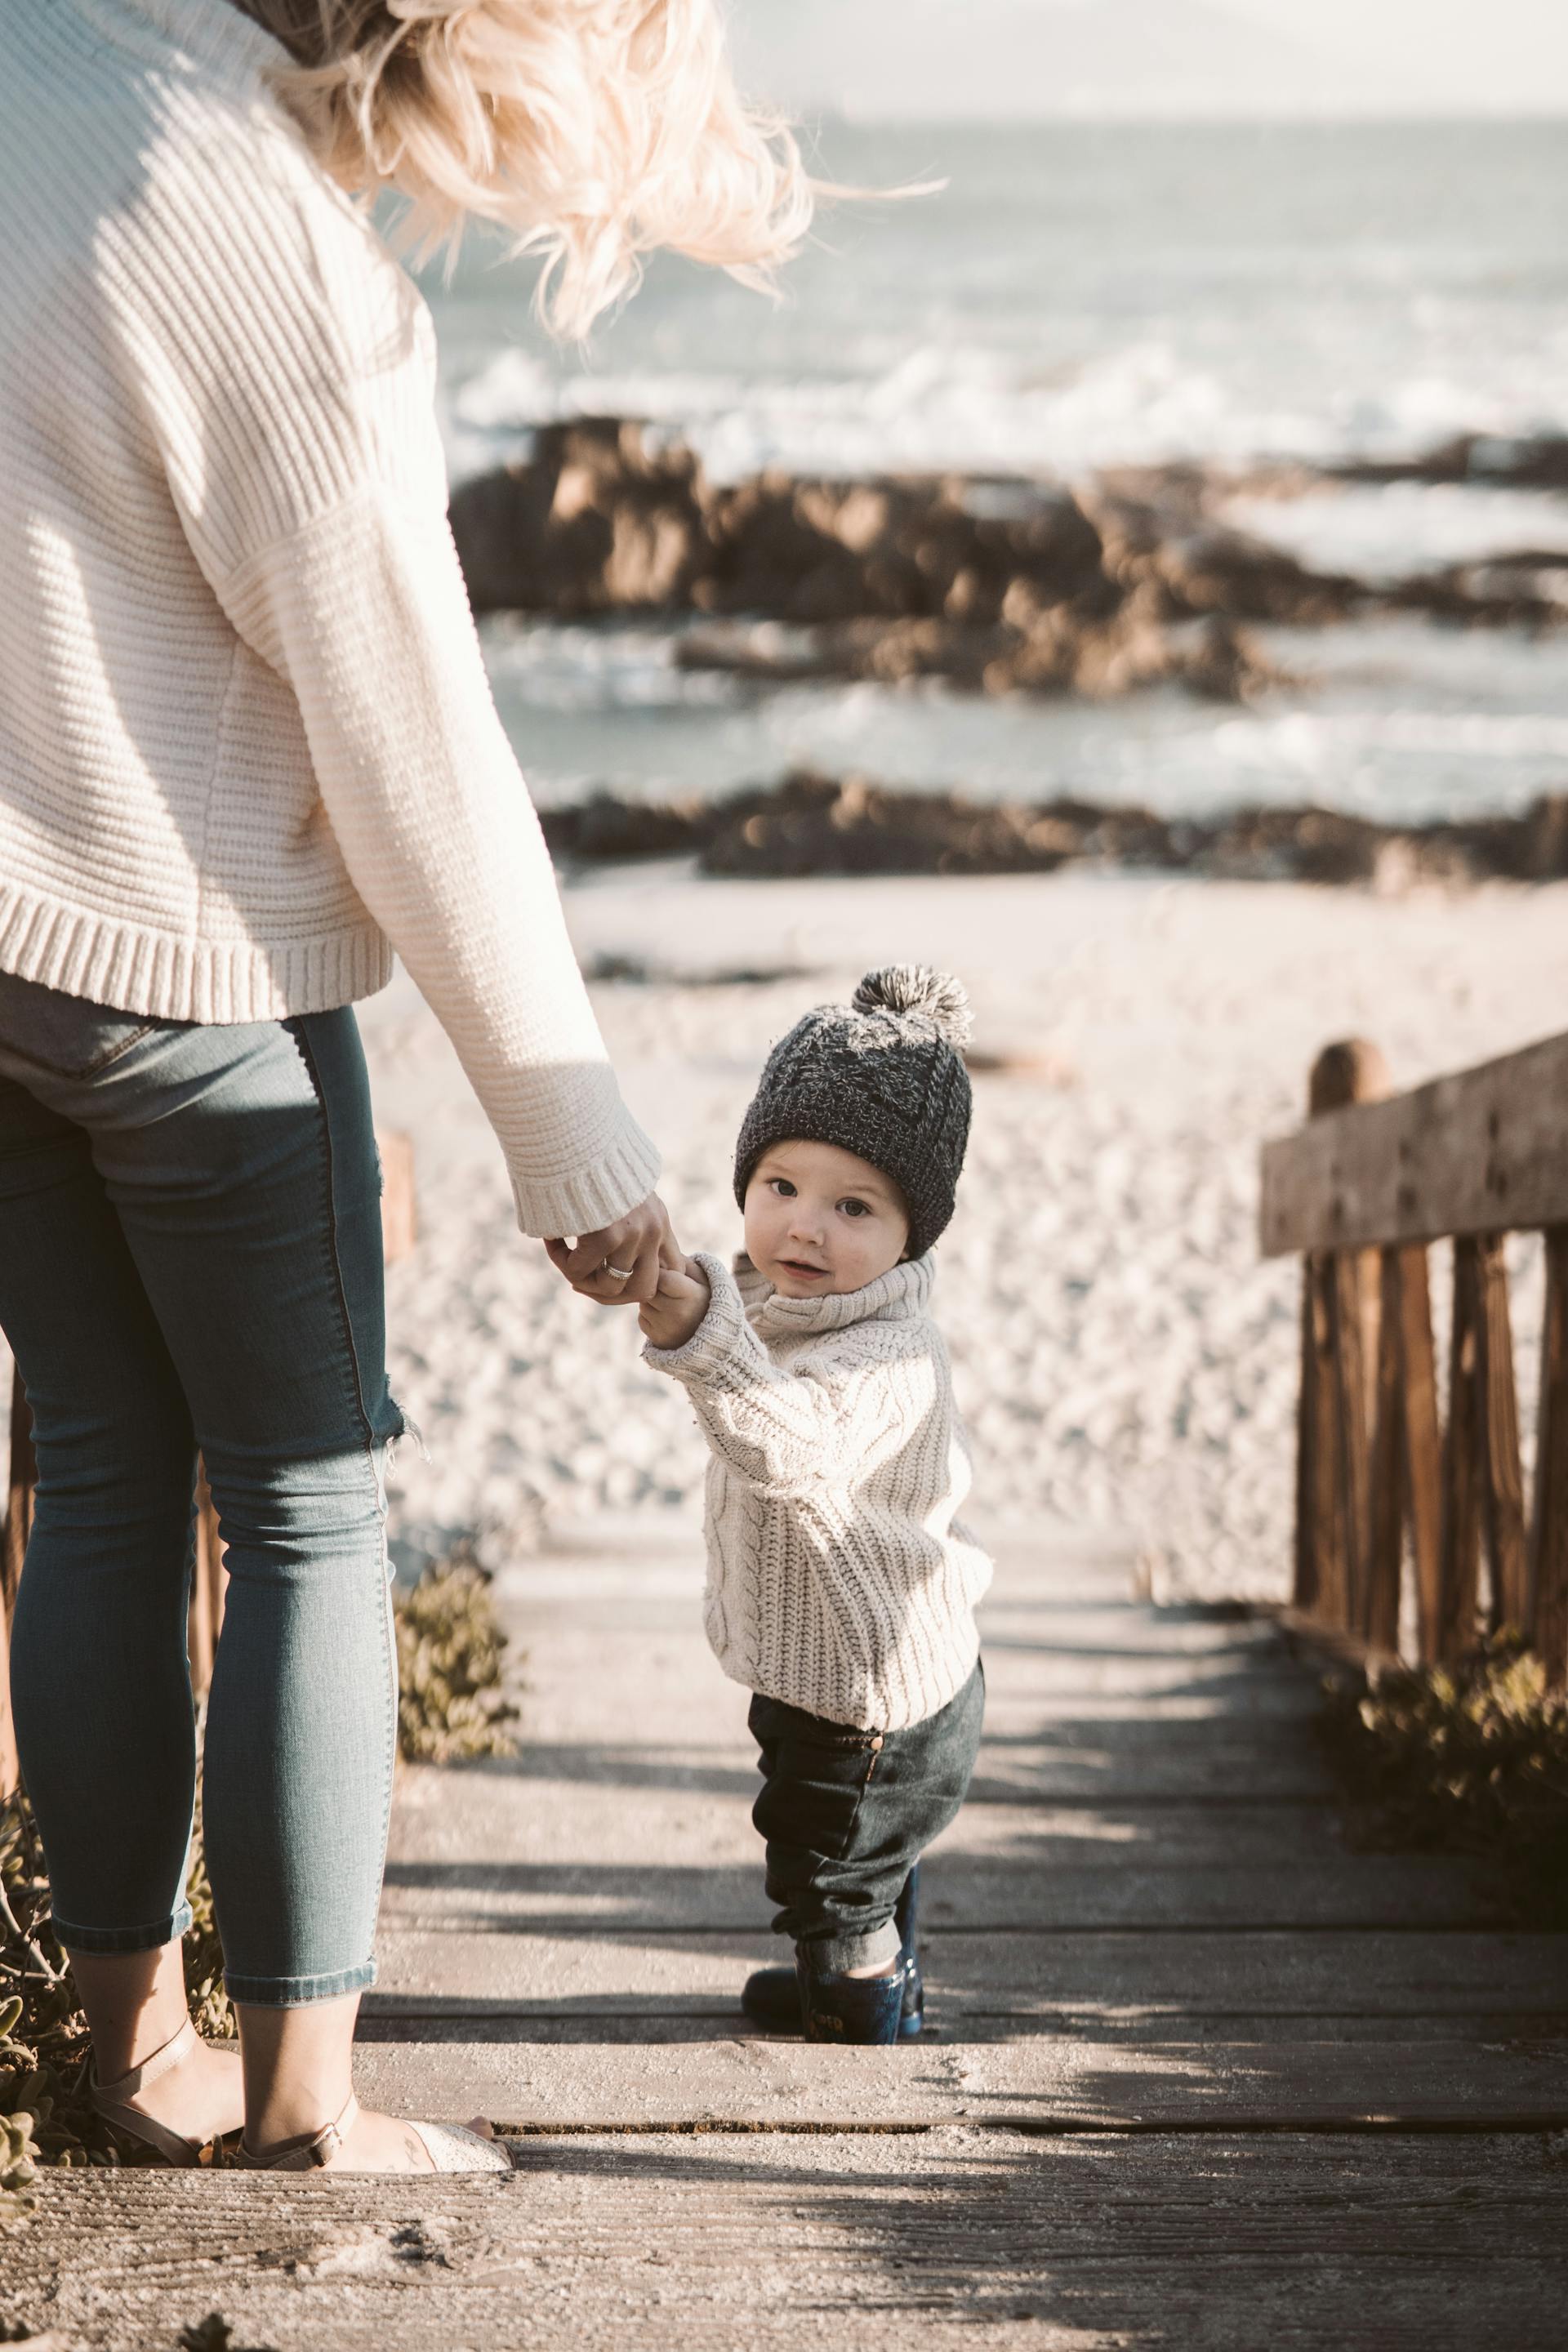 A mother holding her toddler's hand | Source: Pexels